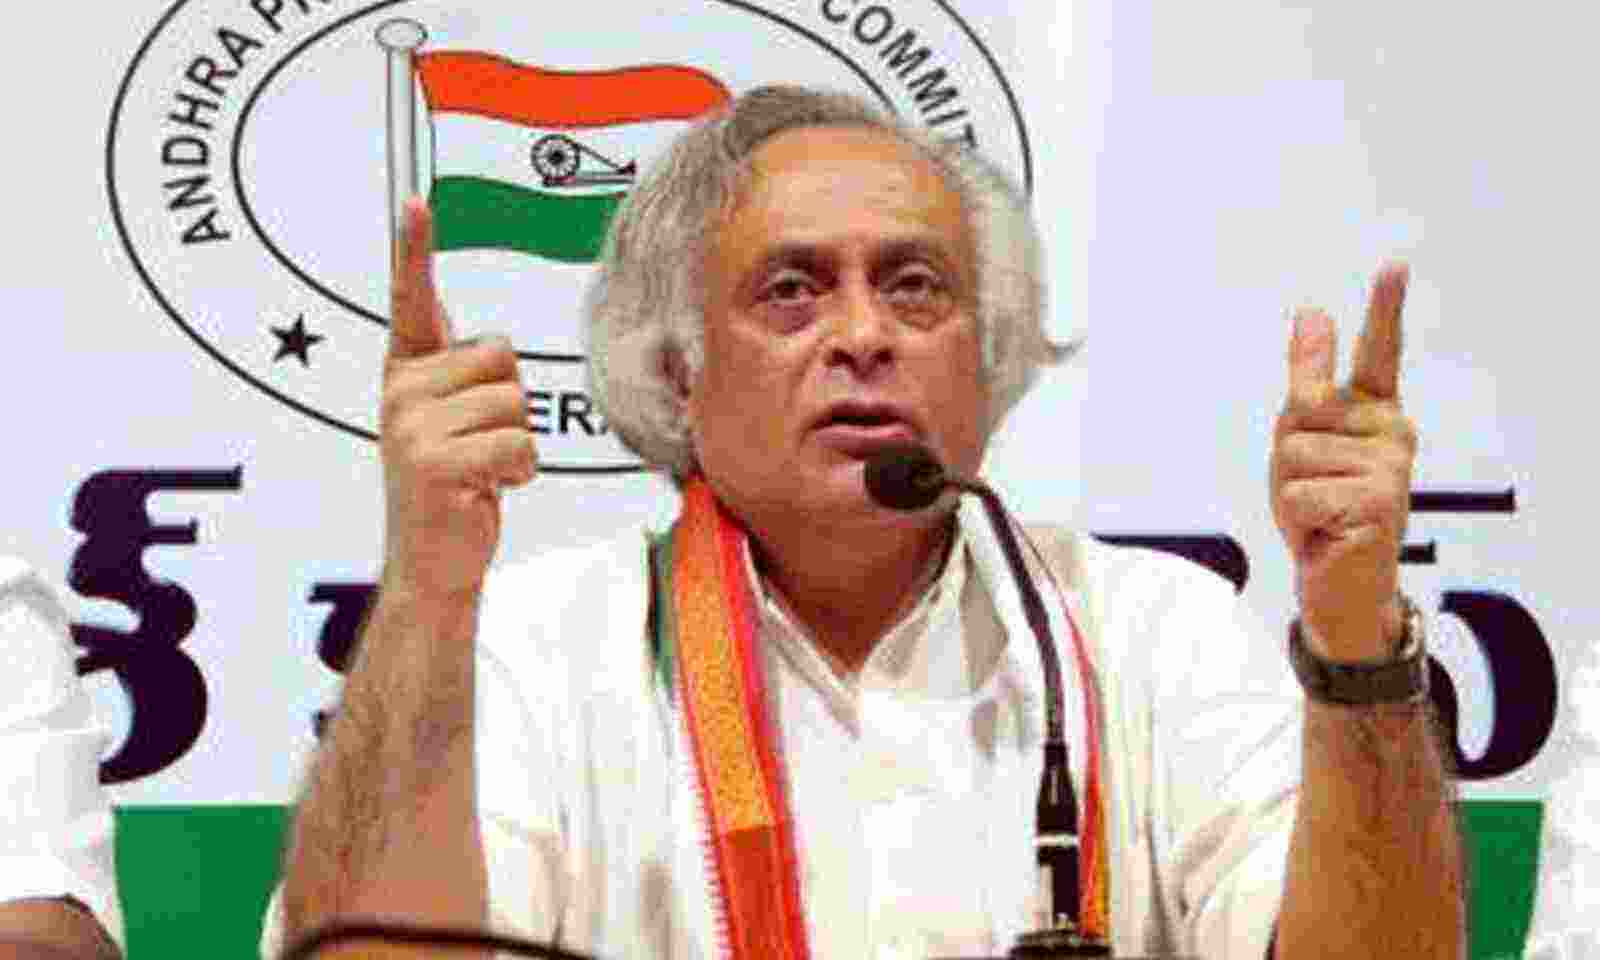 Cong slams exit polls as ‘bogus’, alleges ‘psychological games’ by Modi